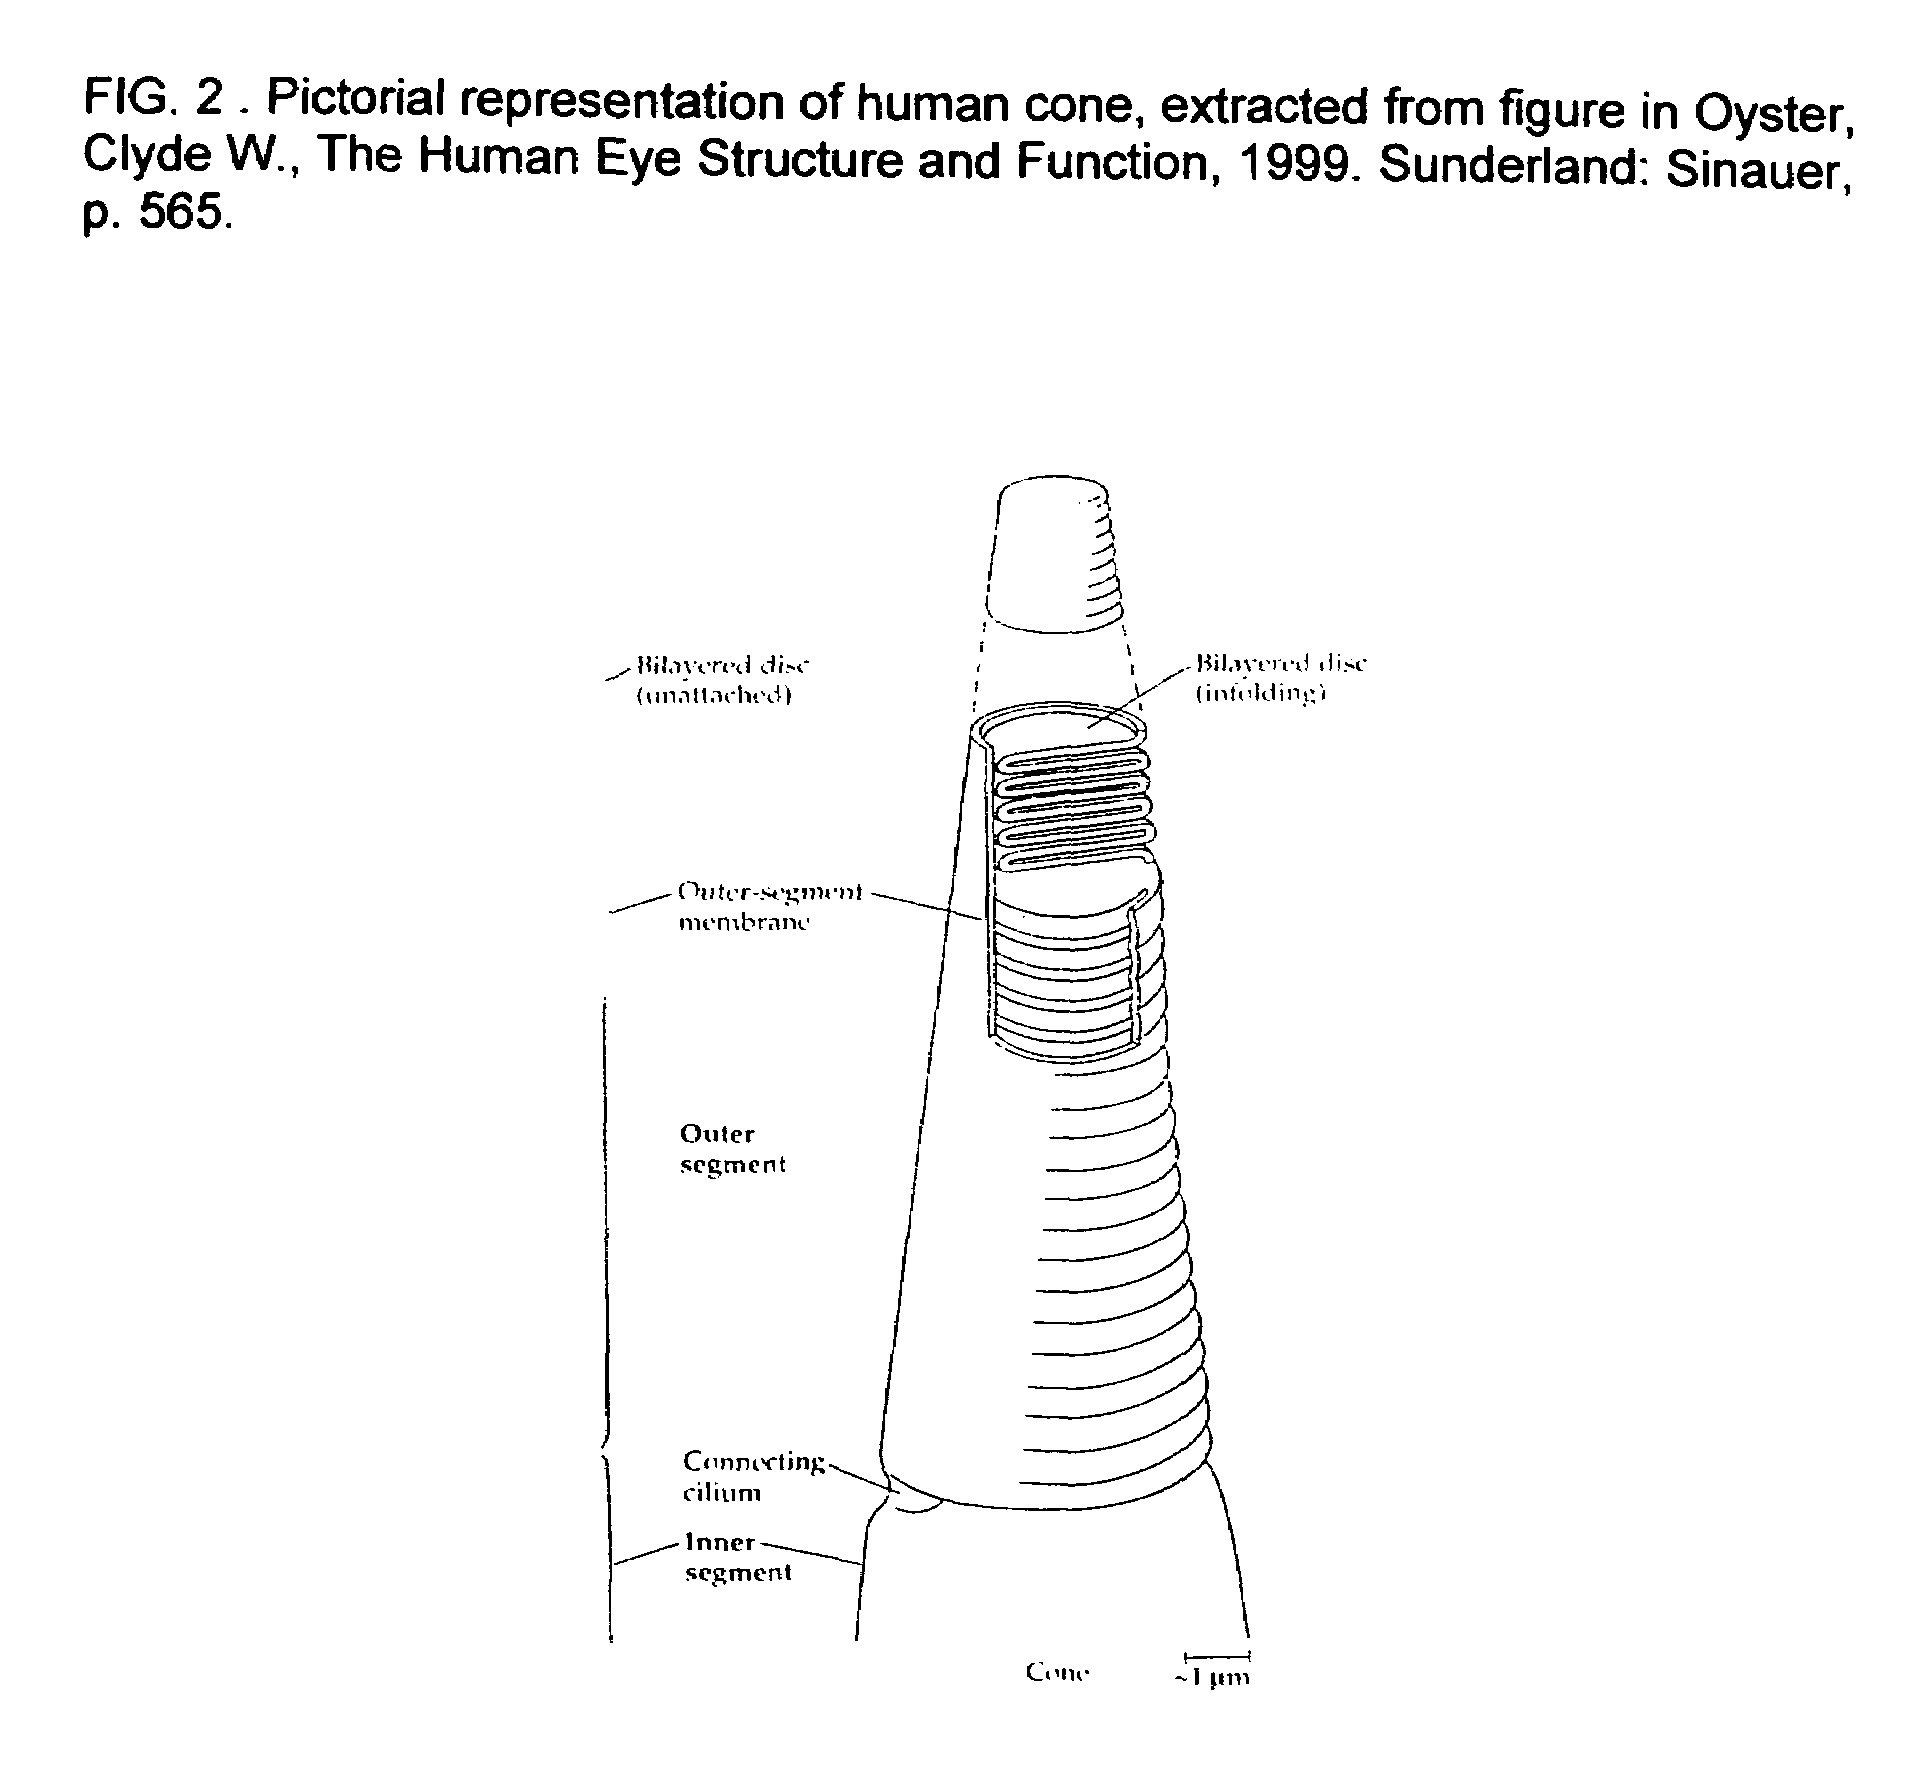 Electromagnetic spectral-based imaging devices and methods